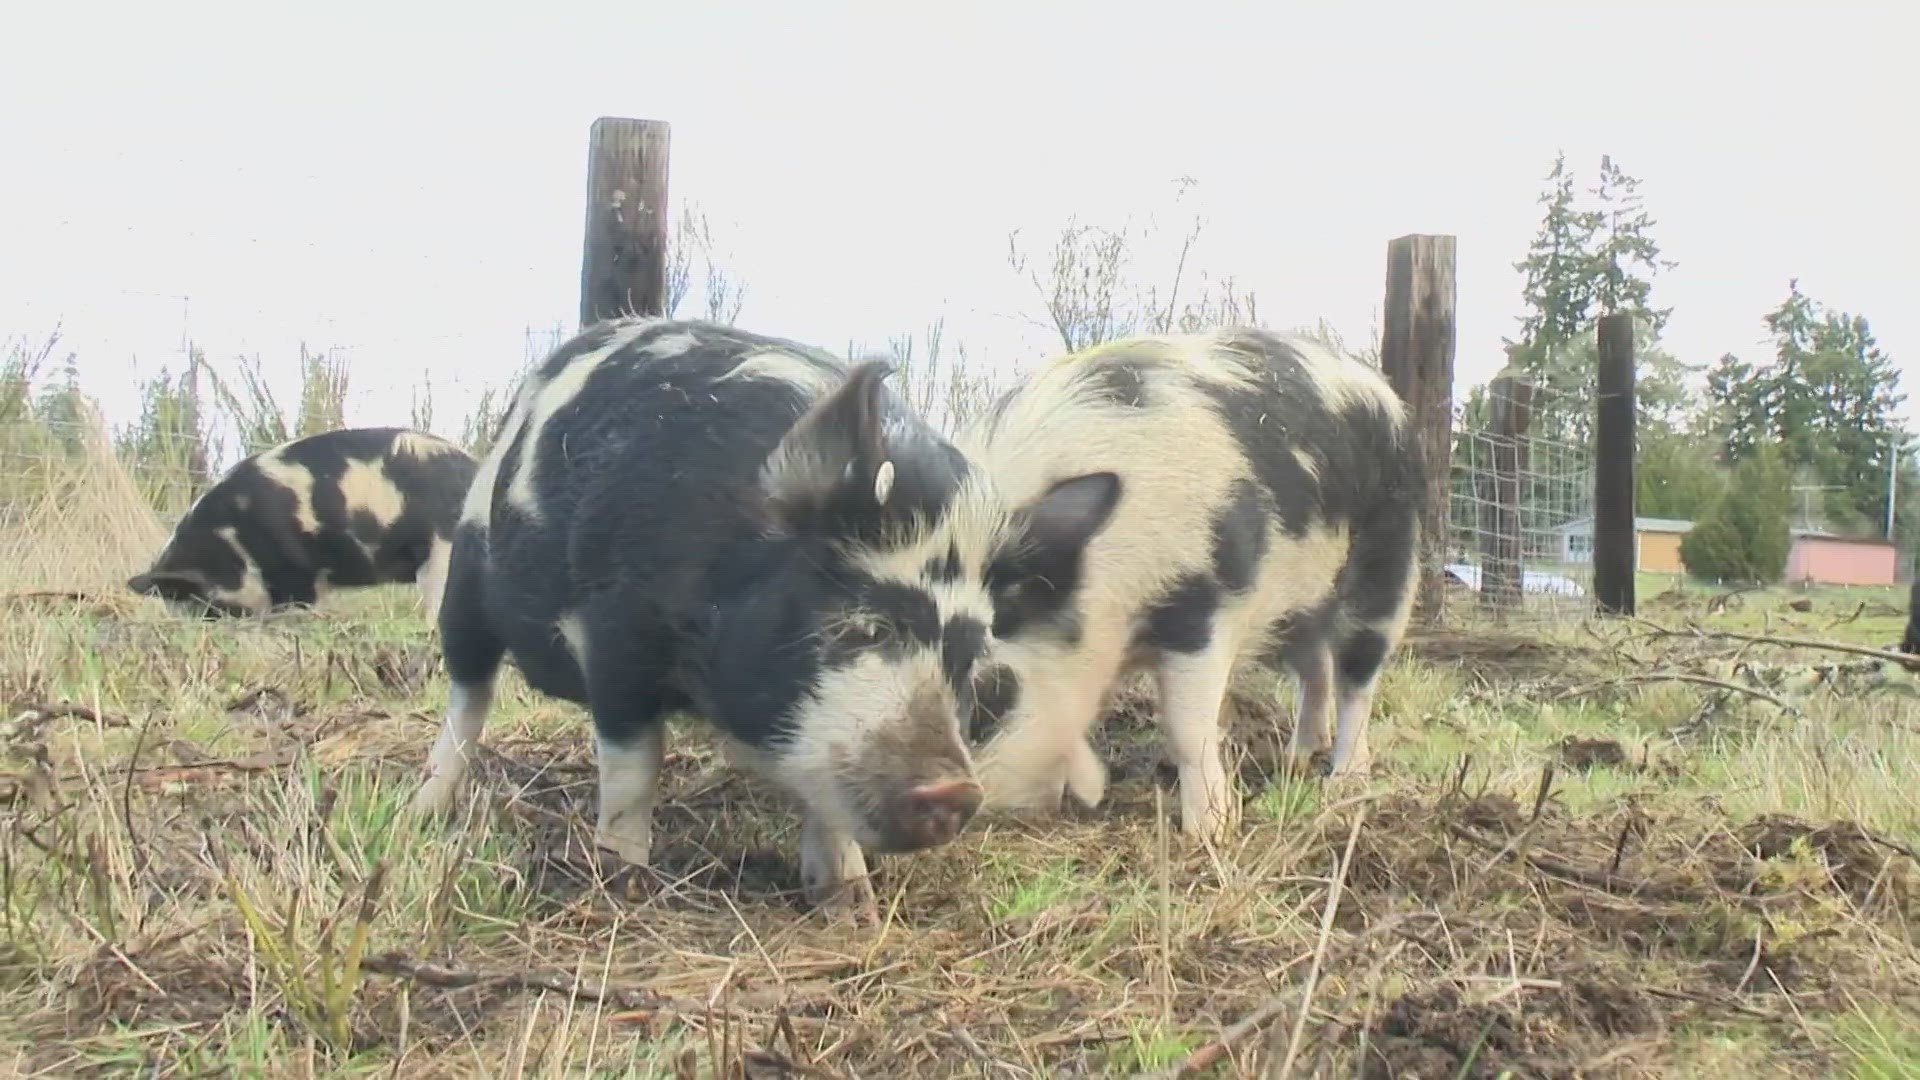 The pigs involved in an animal cruelty case down in Oregon are now calling a farm in Roy their new home.